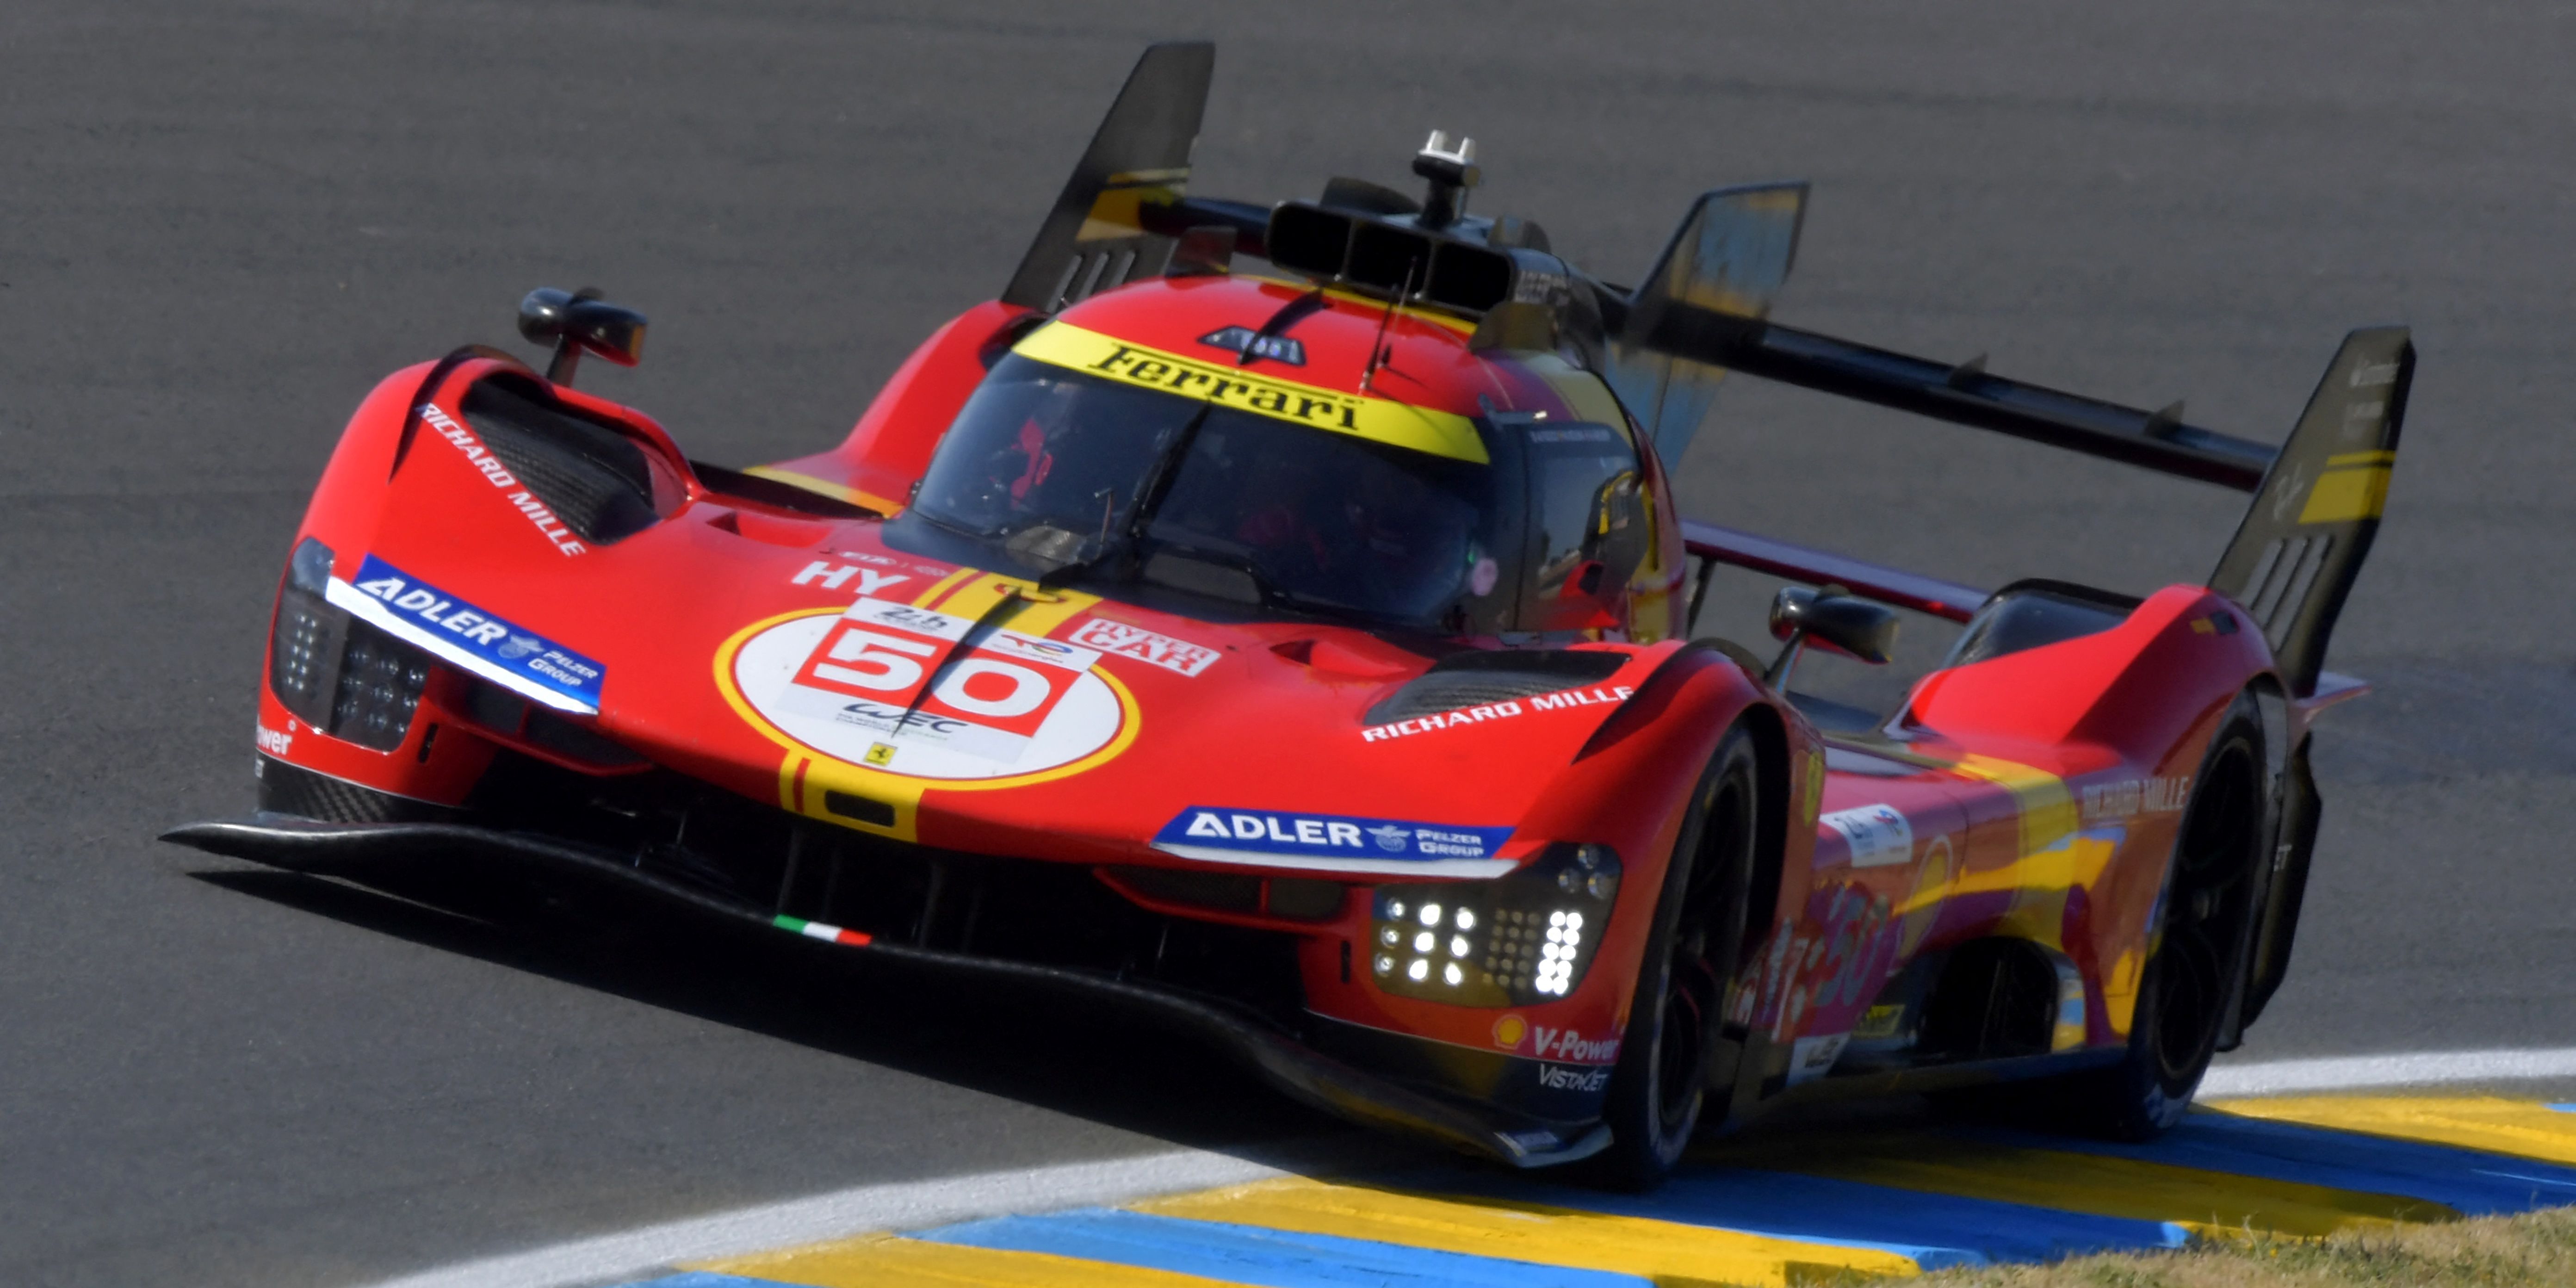 Ferrari Quickest Among Prototypes After Le Mans Test Day